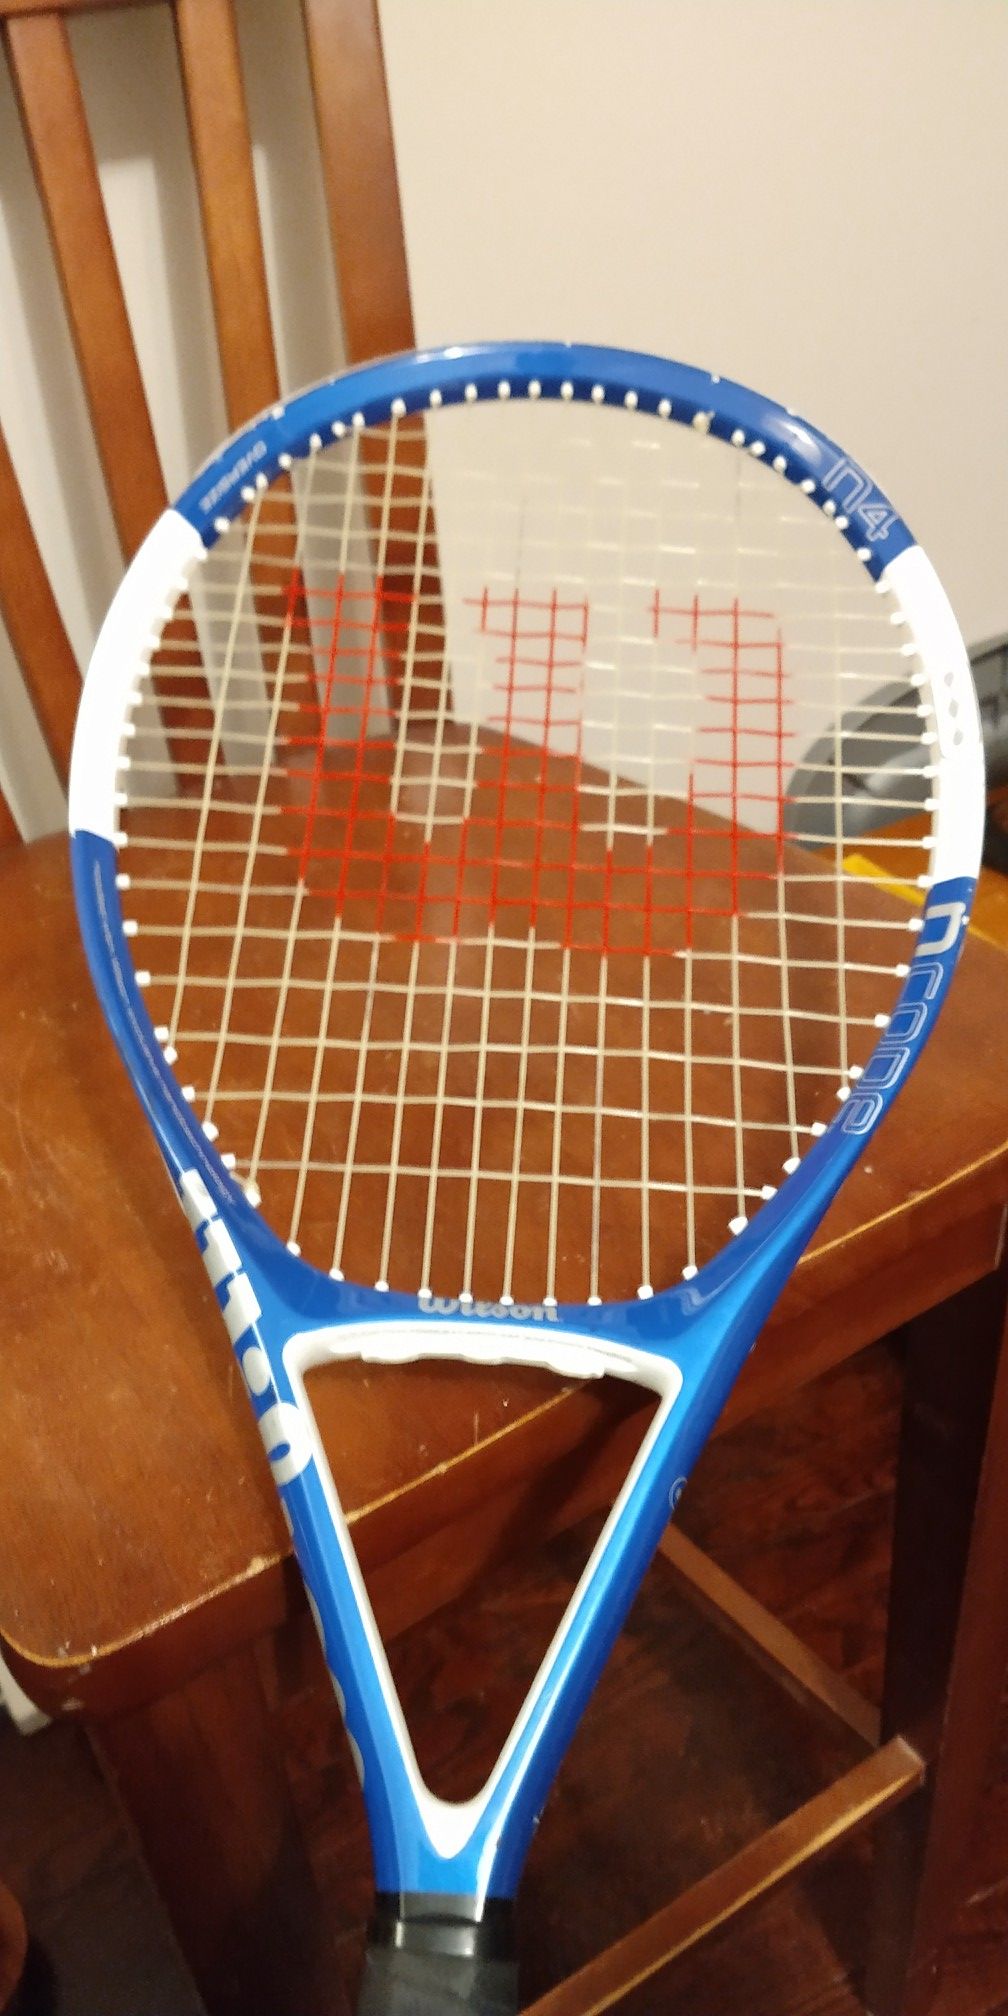 Wilson ncode oversized in for pro racket 4 3/8 record face is 14 and 1/2 in tall 11 in wide